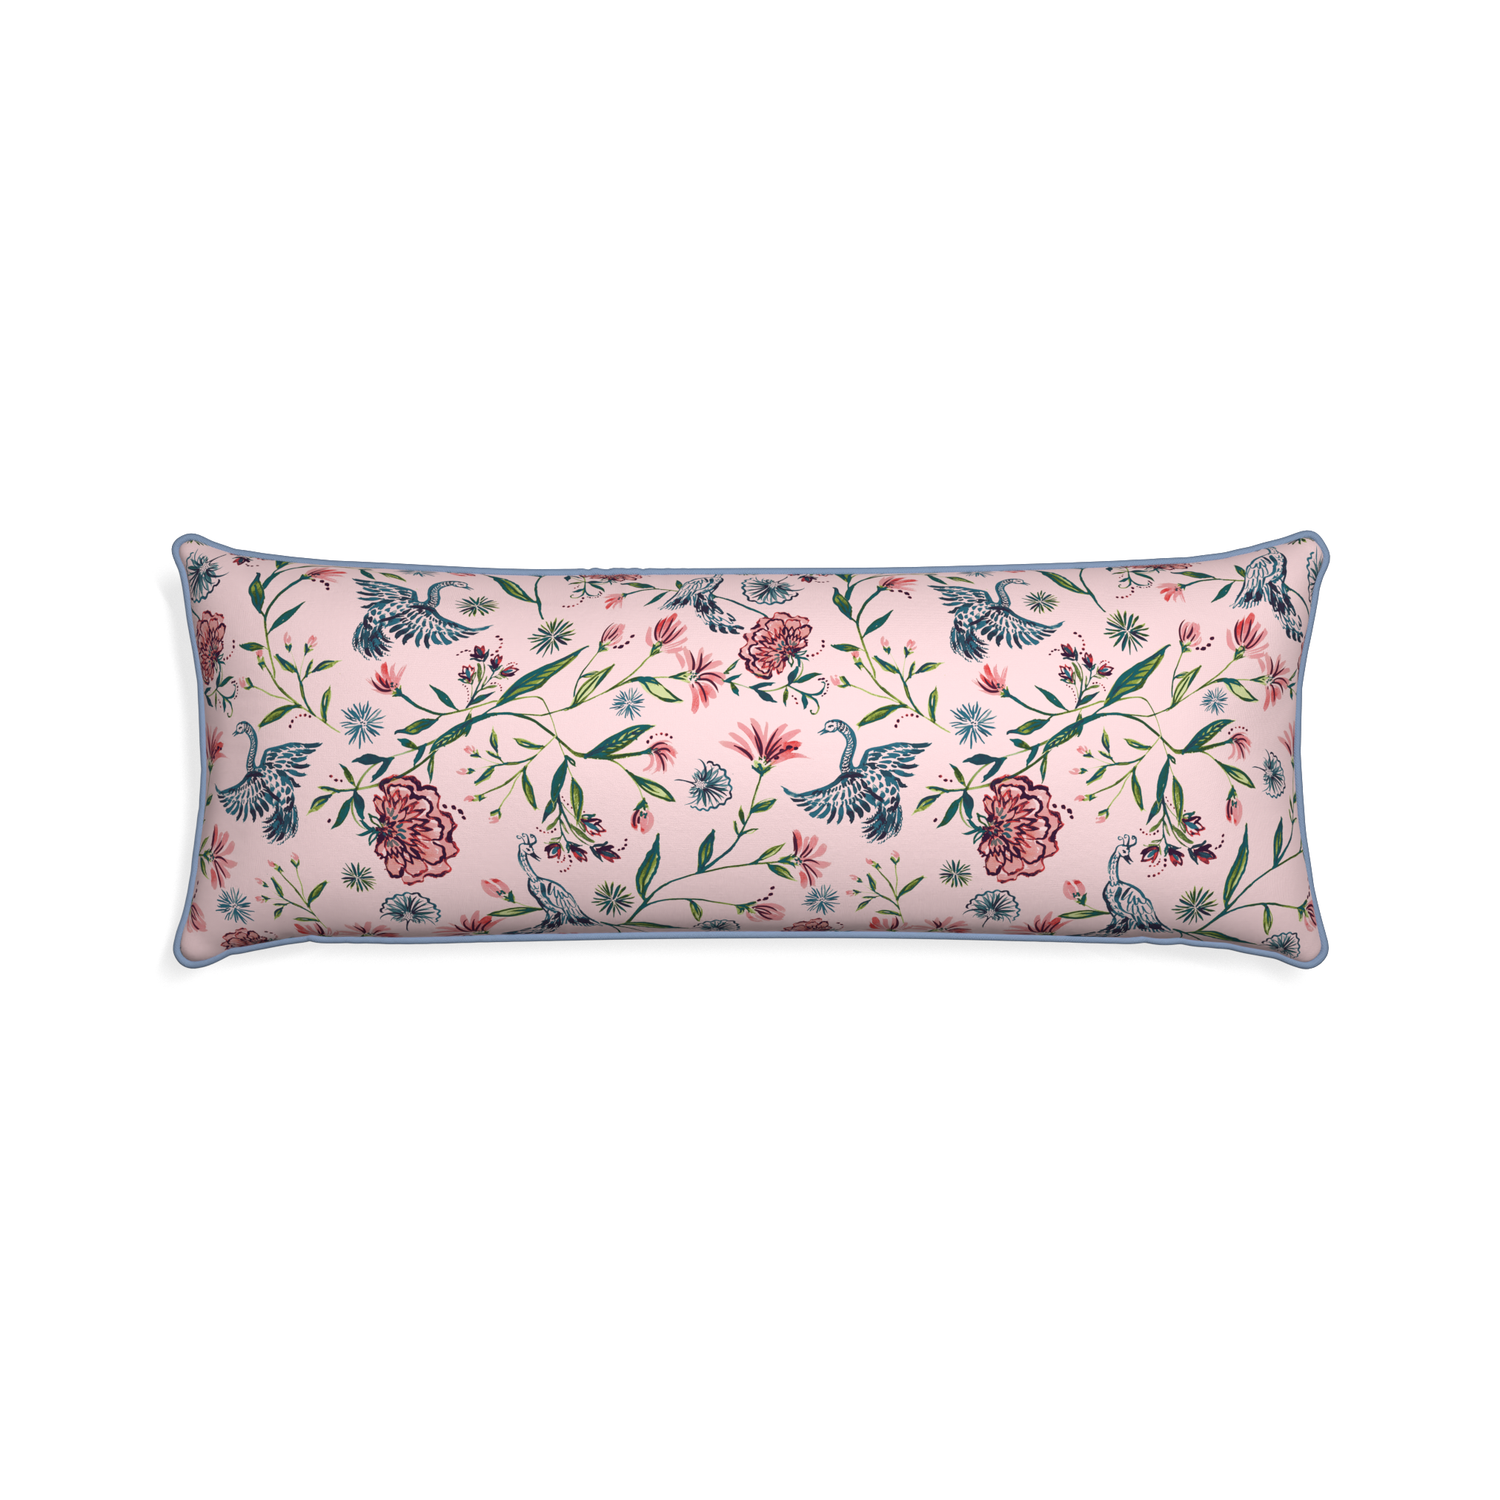 Xl-lumbar daphne rose custom pillow with sky piping on white background